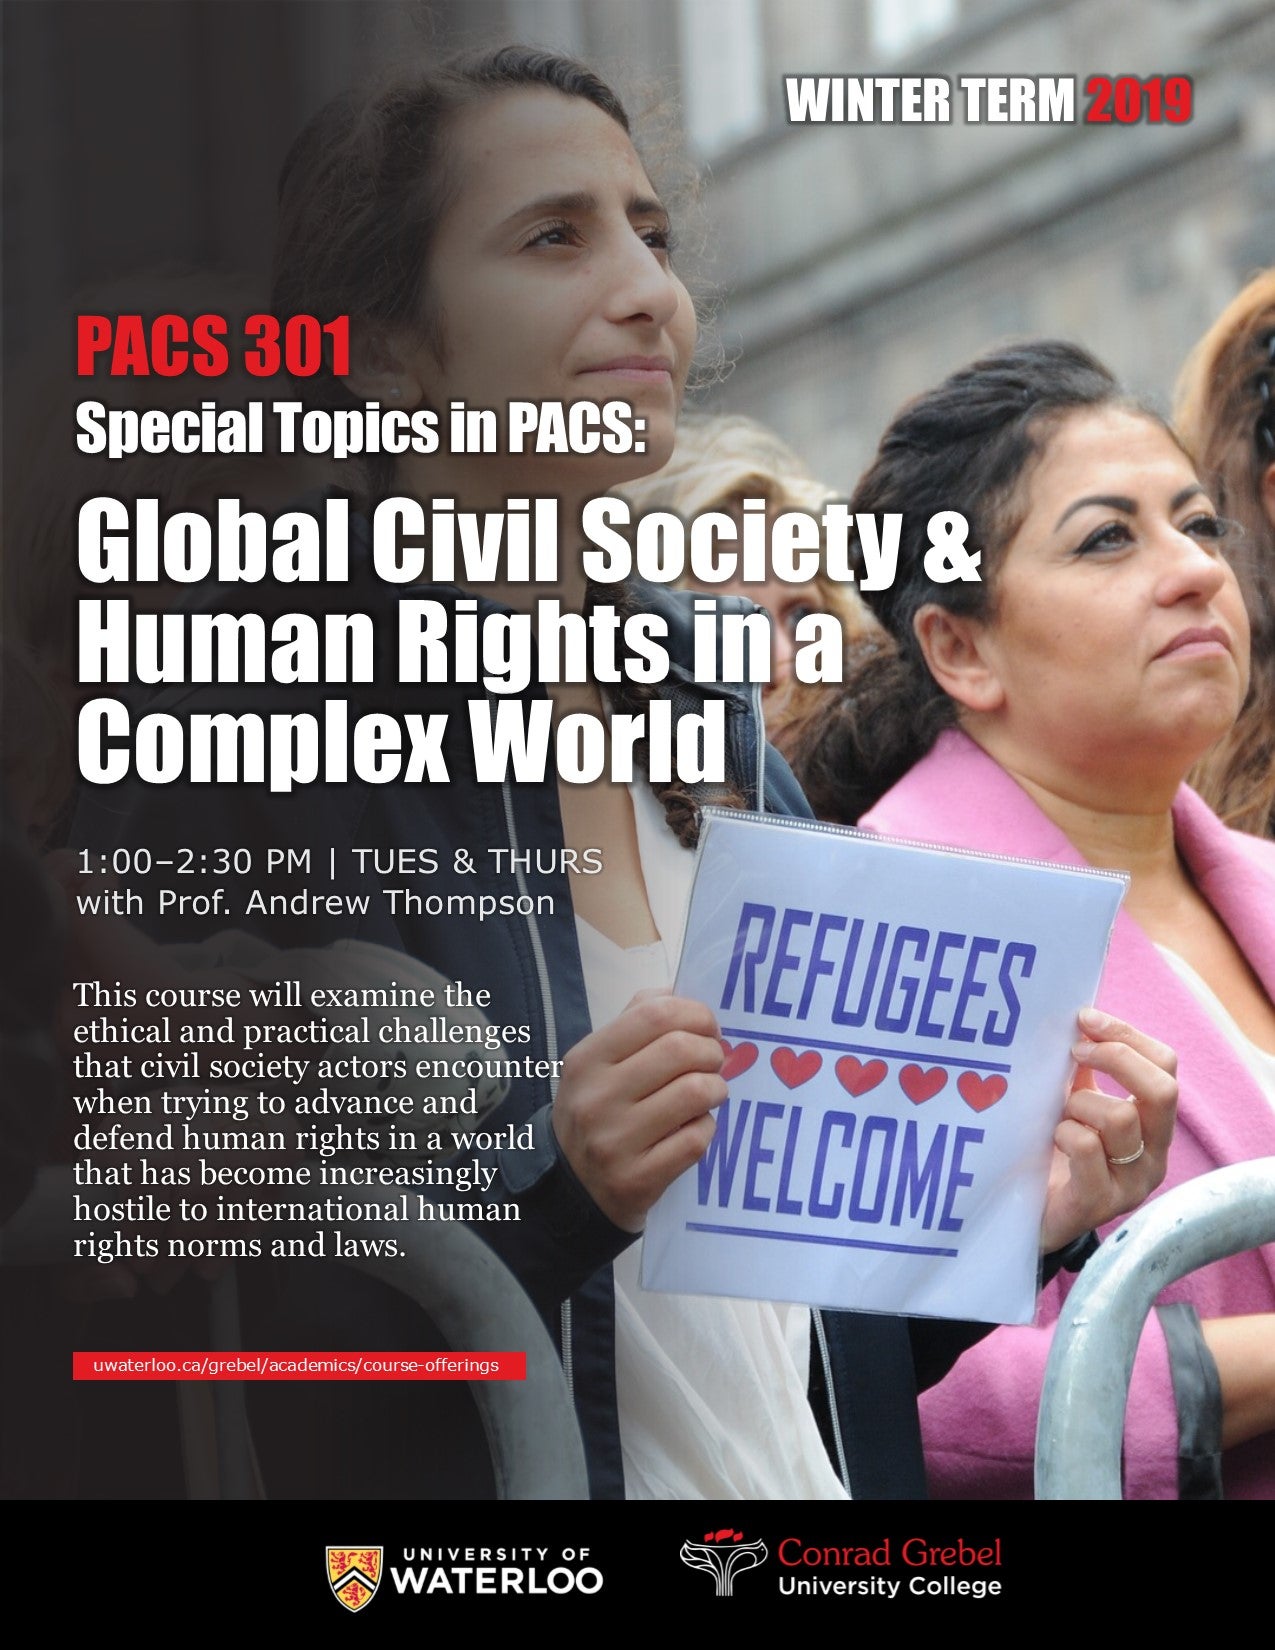 Poster for PACS 301 course. Features women holding signs. Text displays information about the course.